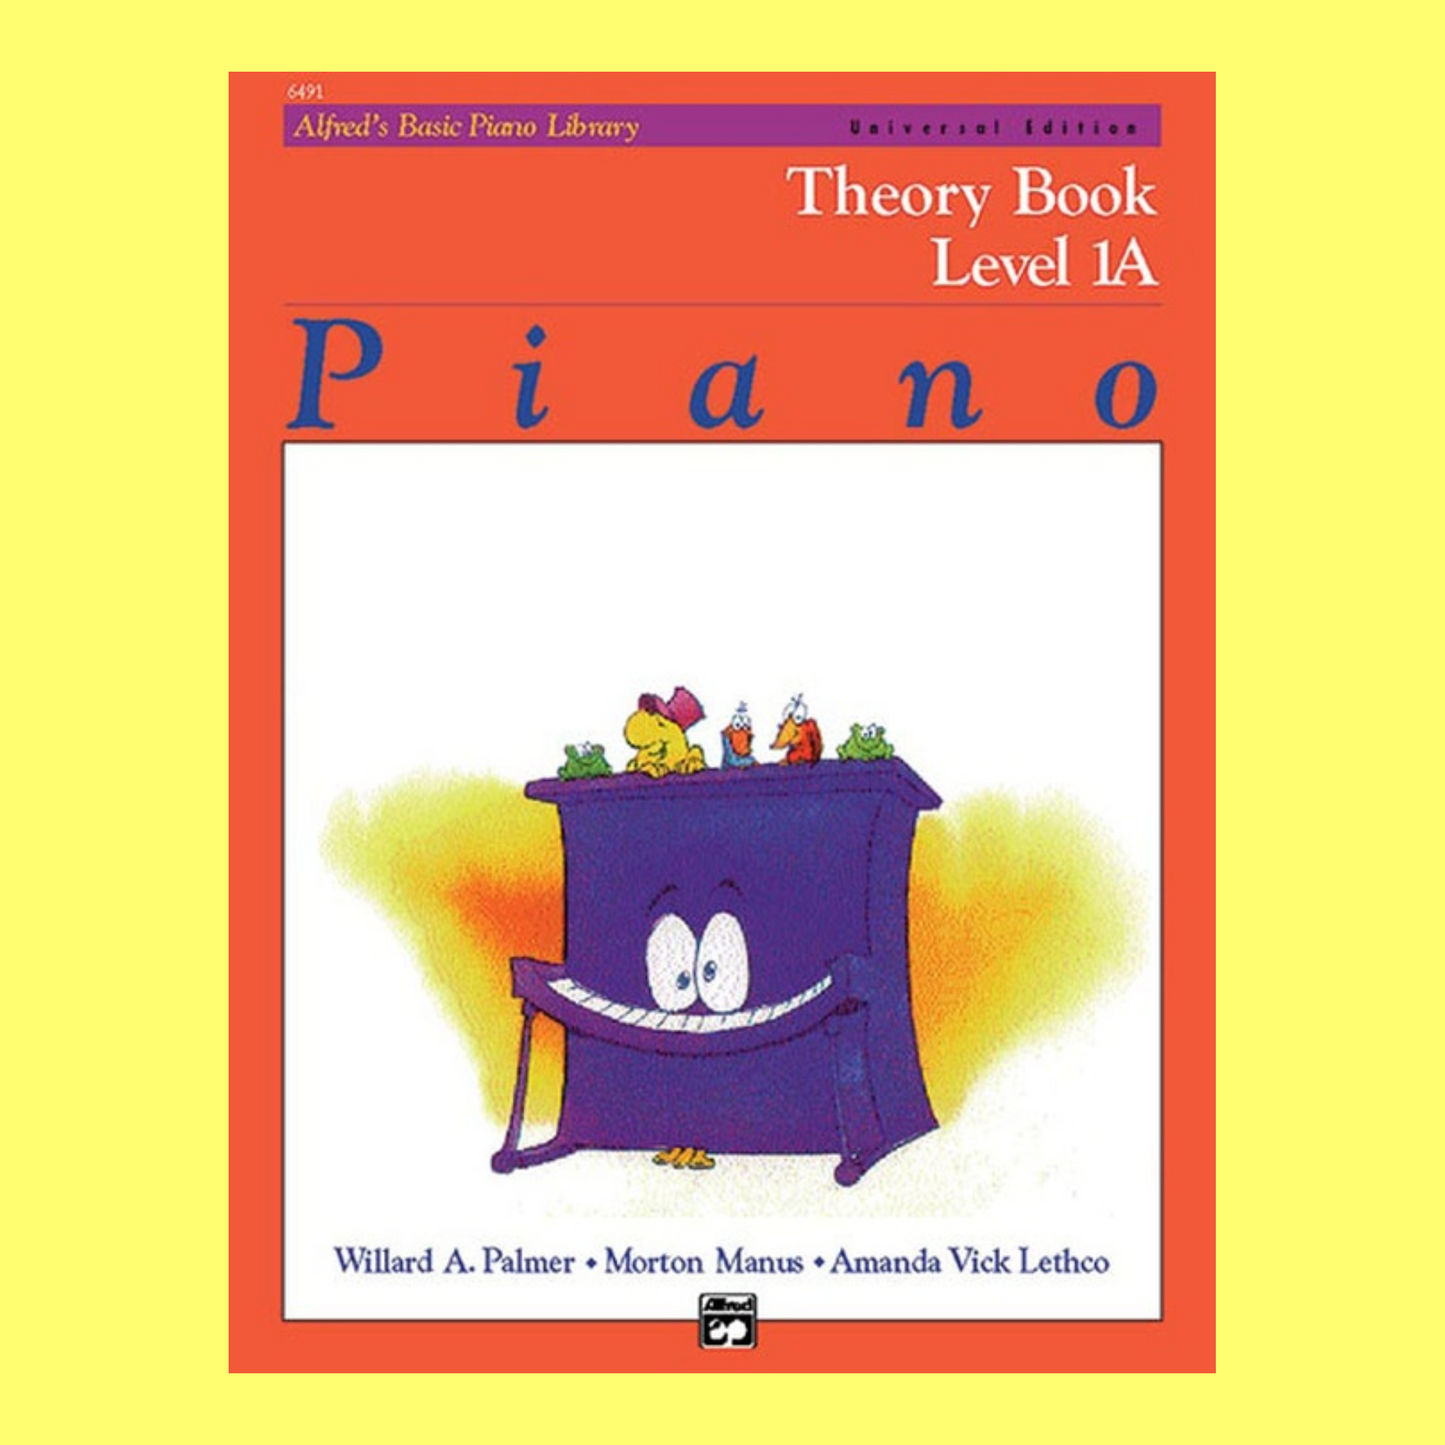 Alfred's Basic Piano Library - Theory Book Level 1A (Universal Edition)